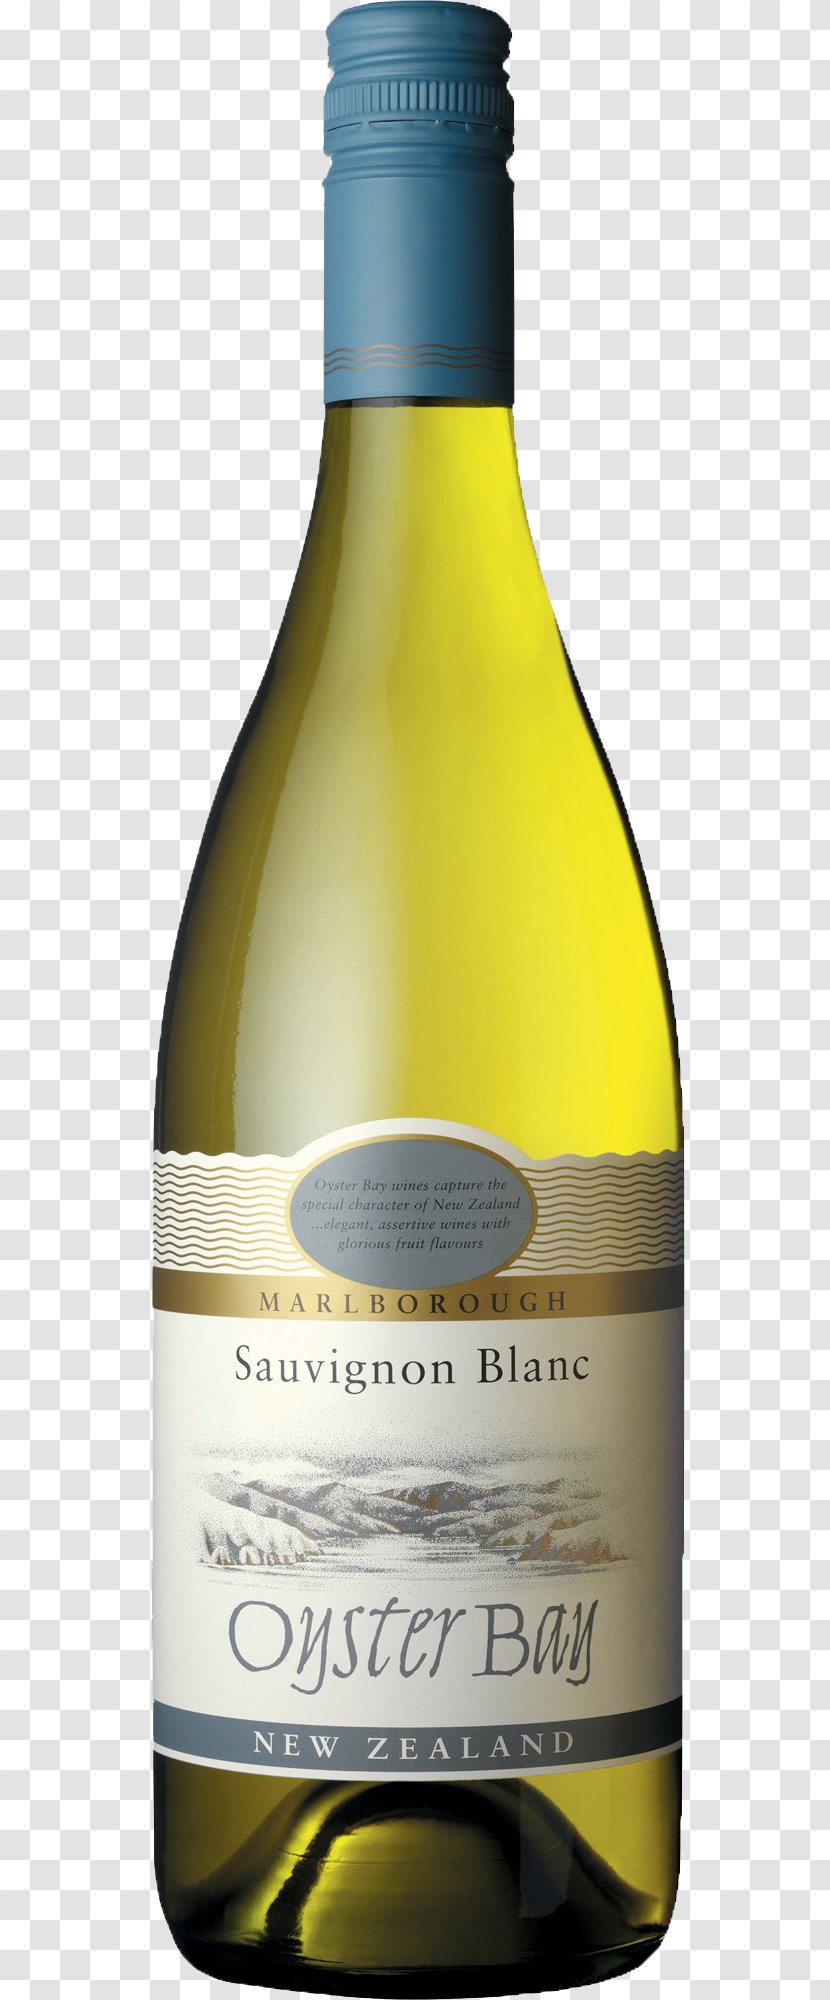 Sauvignon Blanc White Wine Oyster Bay Pinot Gris - Bottle - Green Transparent PNG